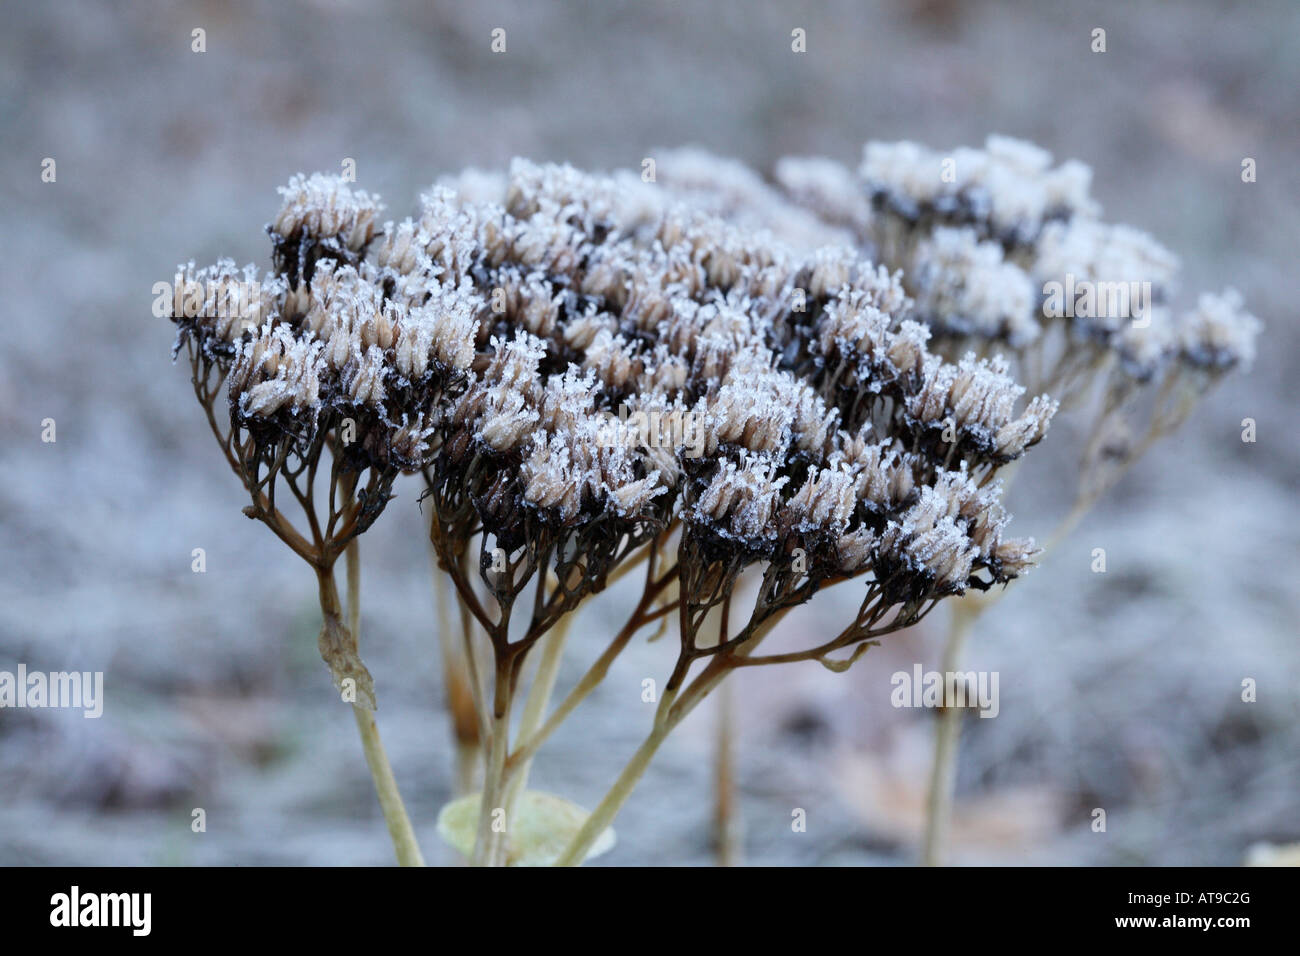 Seed head of sedum flowers.  Each small flower head at the end of the compound triple umbel is coated in tiny ice crystals Stock Photo